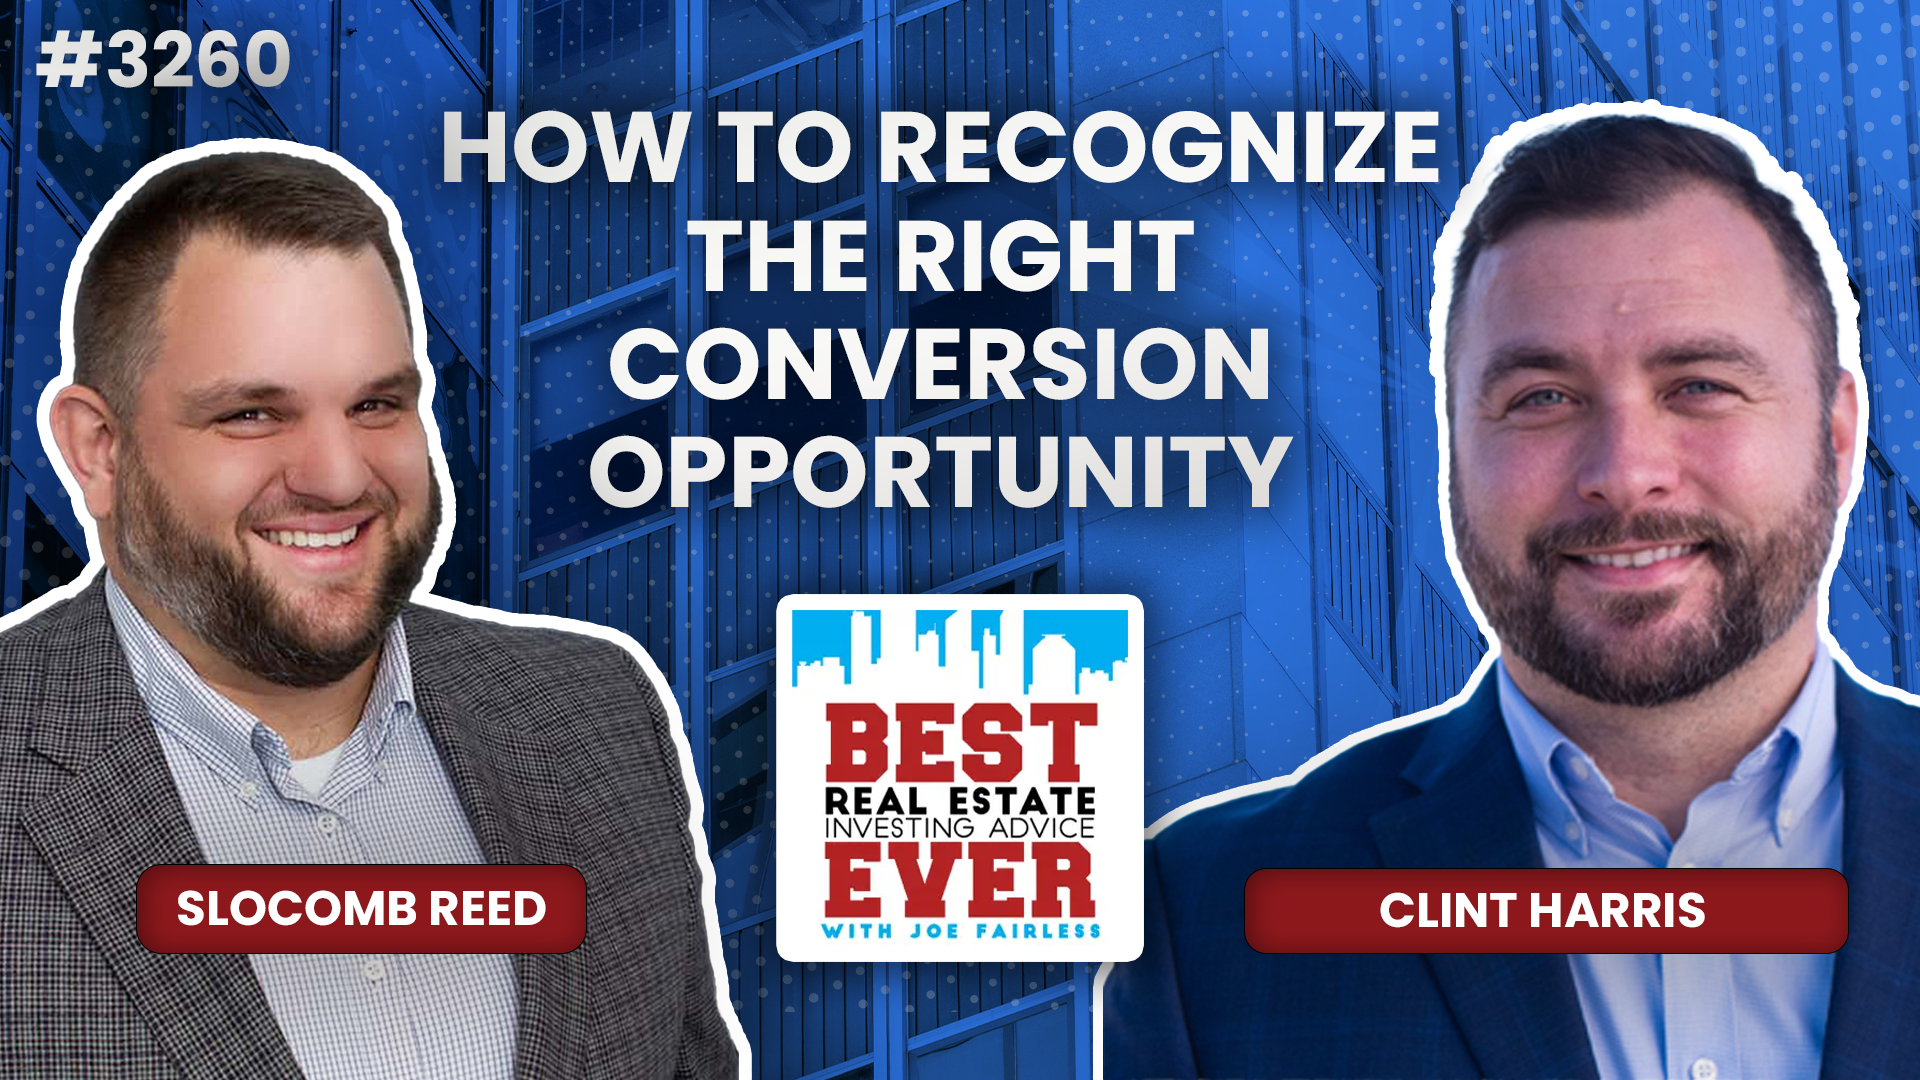 JF3260: Clint Harris - How to Recognize the Right Conversion Opportunity, Strategies on the Fastest Ways to Grow Wealth, and The Potential in Big-Box Retail